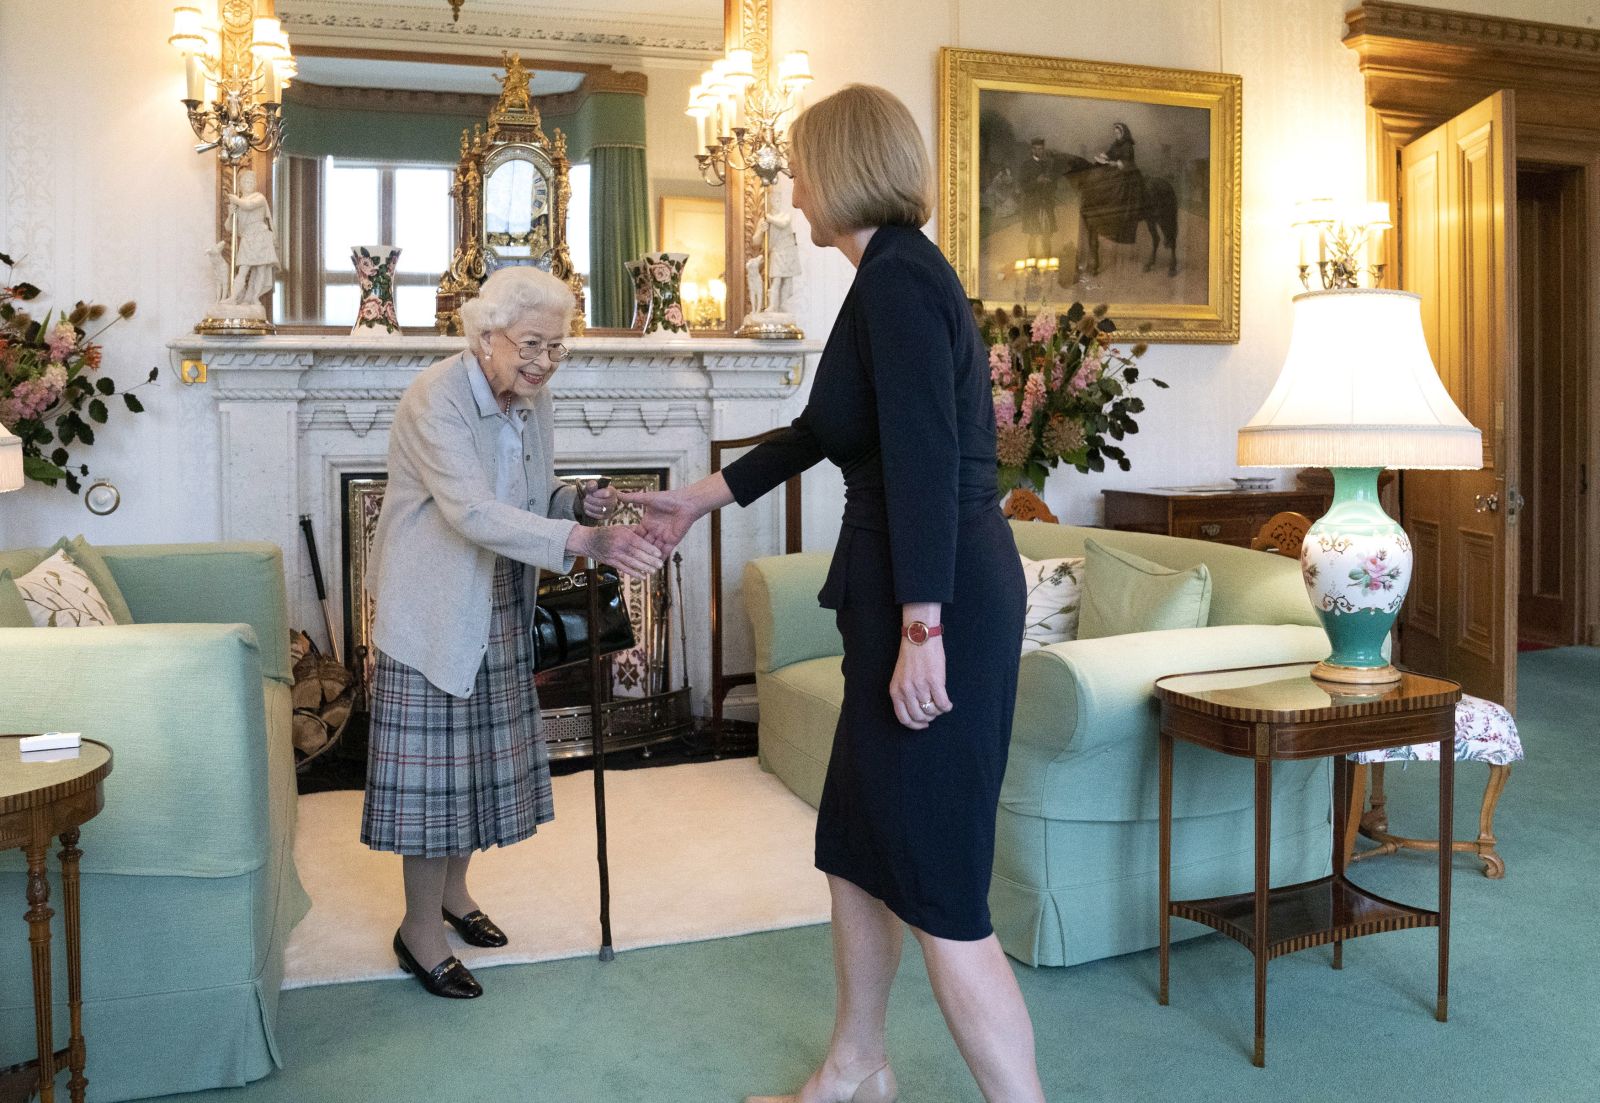 epa10164089 Queen Elizabeth II welcomes Liz Truss during an audience at Balmoral, Scotland, Britain 06 September 2022. Truss was in Balmoral for an audience with Queen Elizabeth II where she was invited to become Prime Minister and form a new government.  EPA/Andrew Milligan / POOL